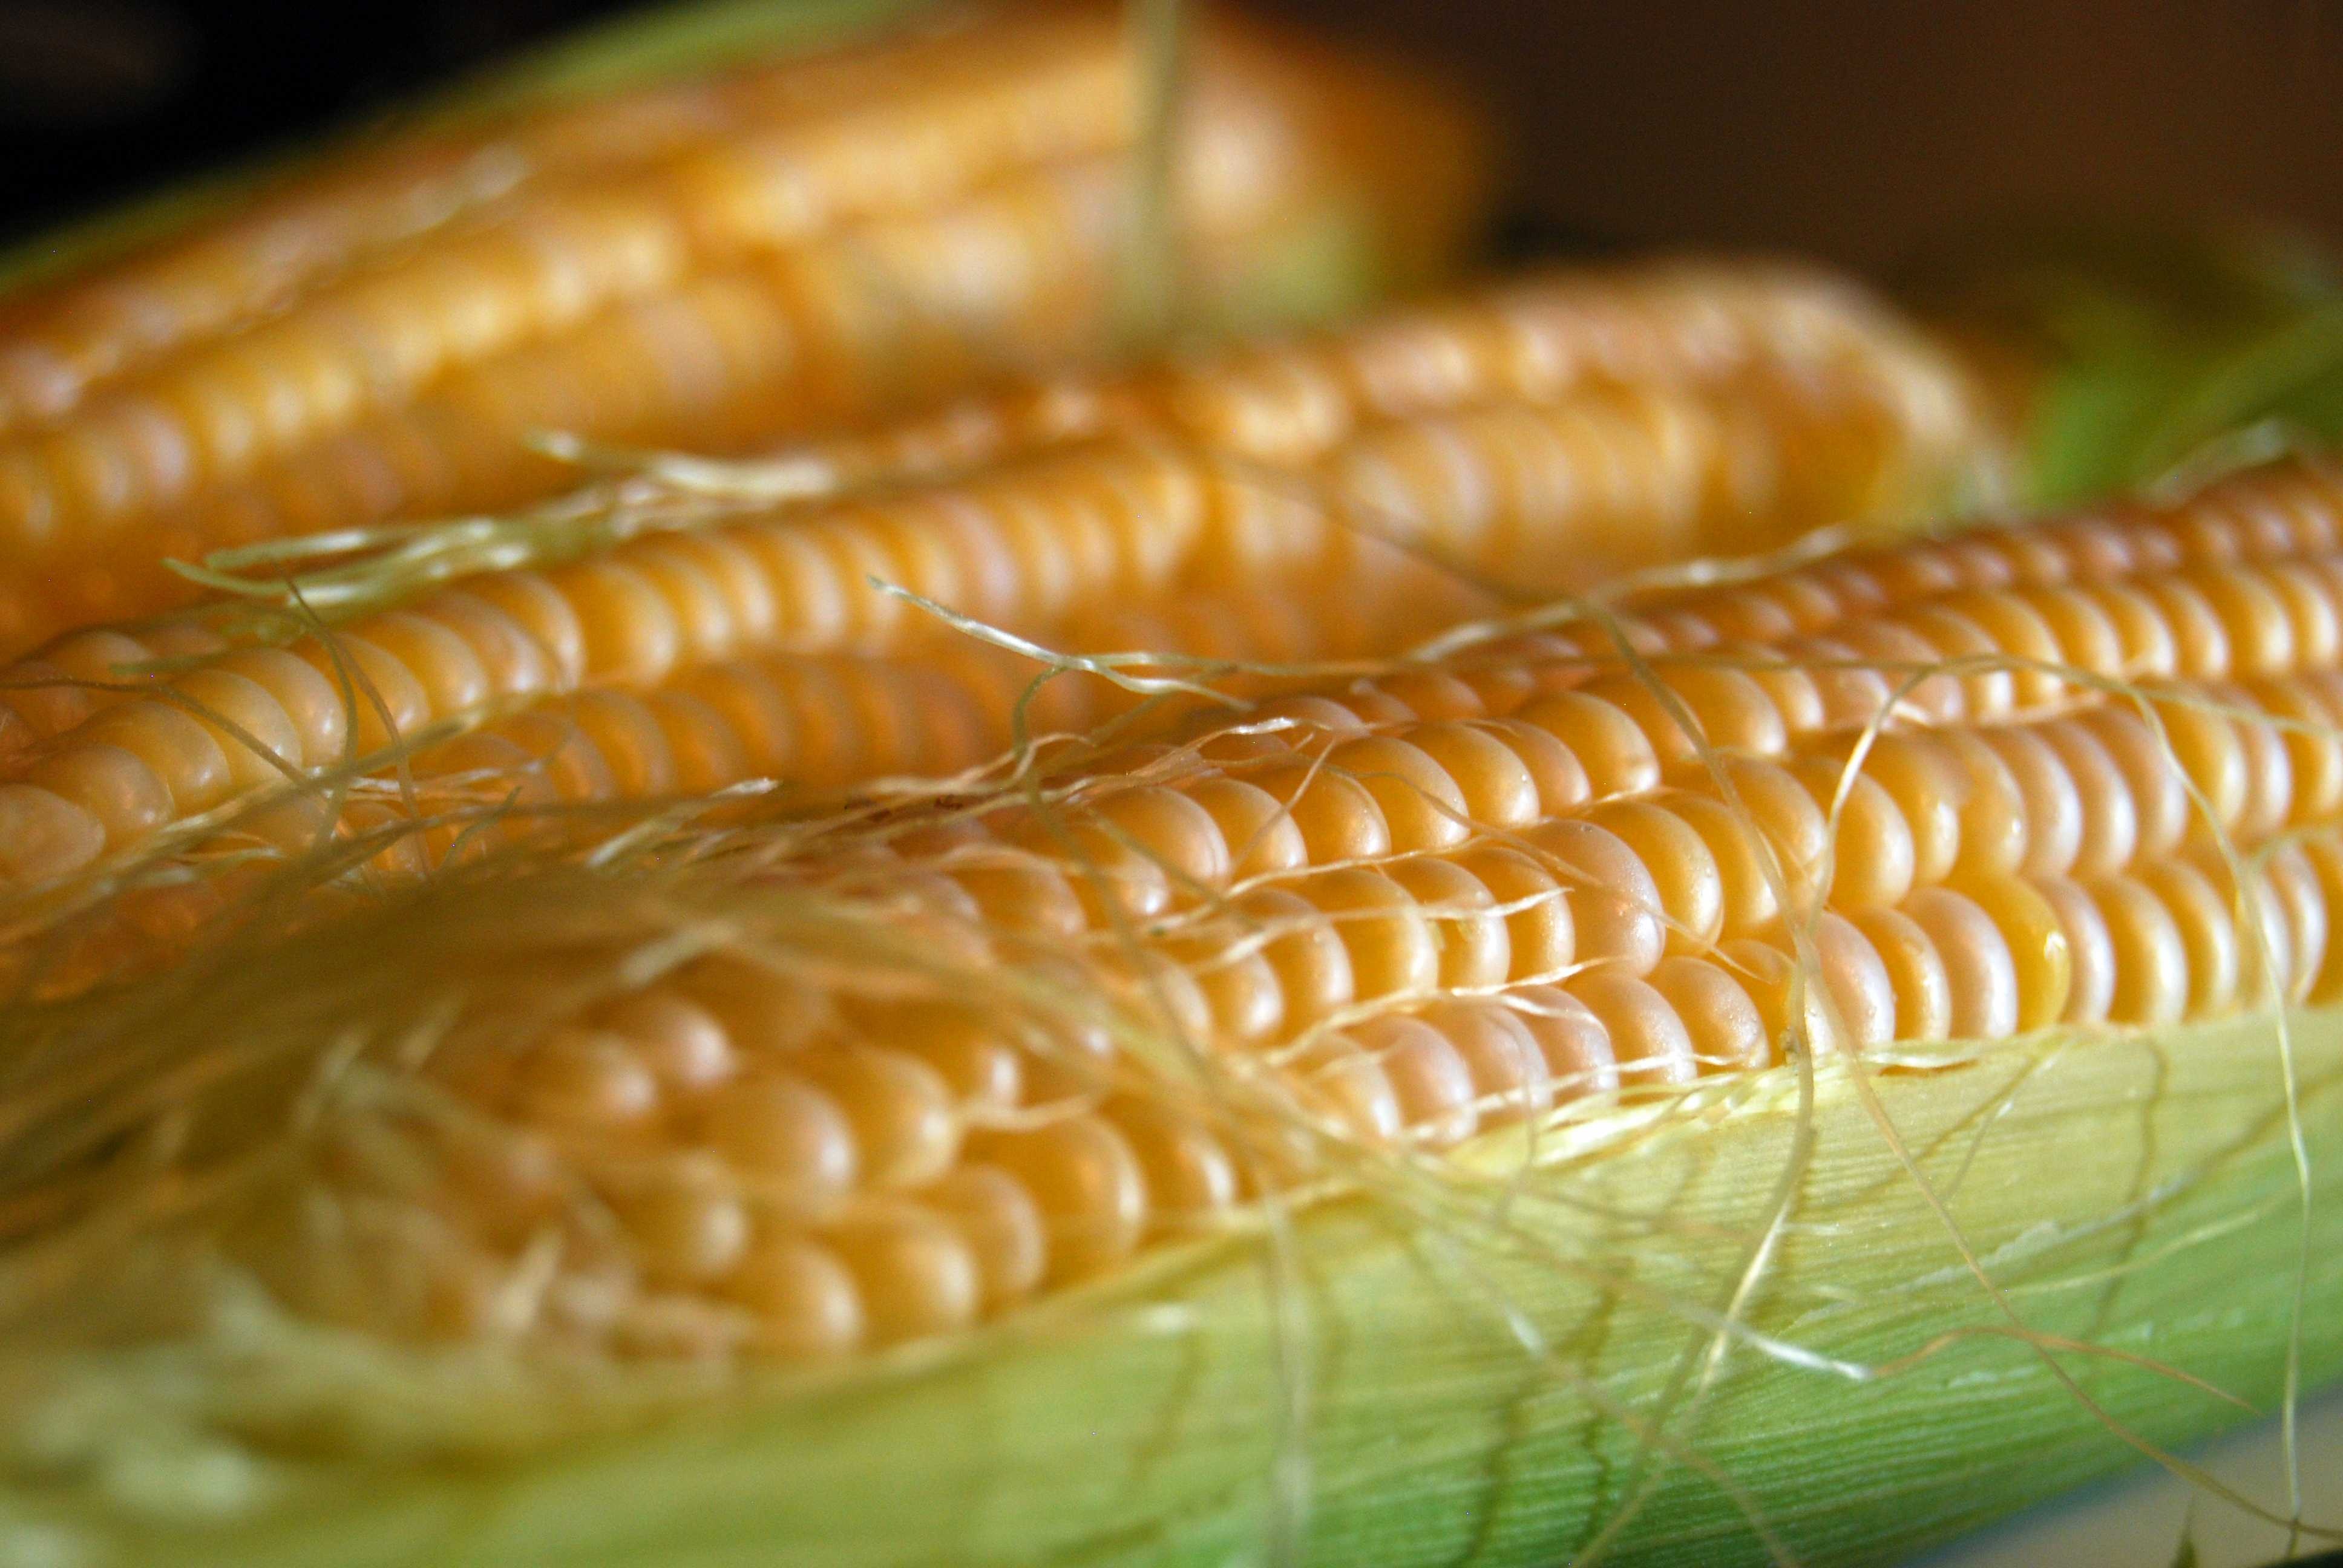 Sweetcorn image classifcation dataset for machine learning